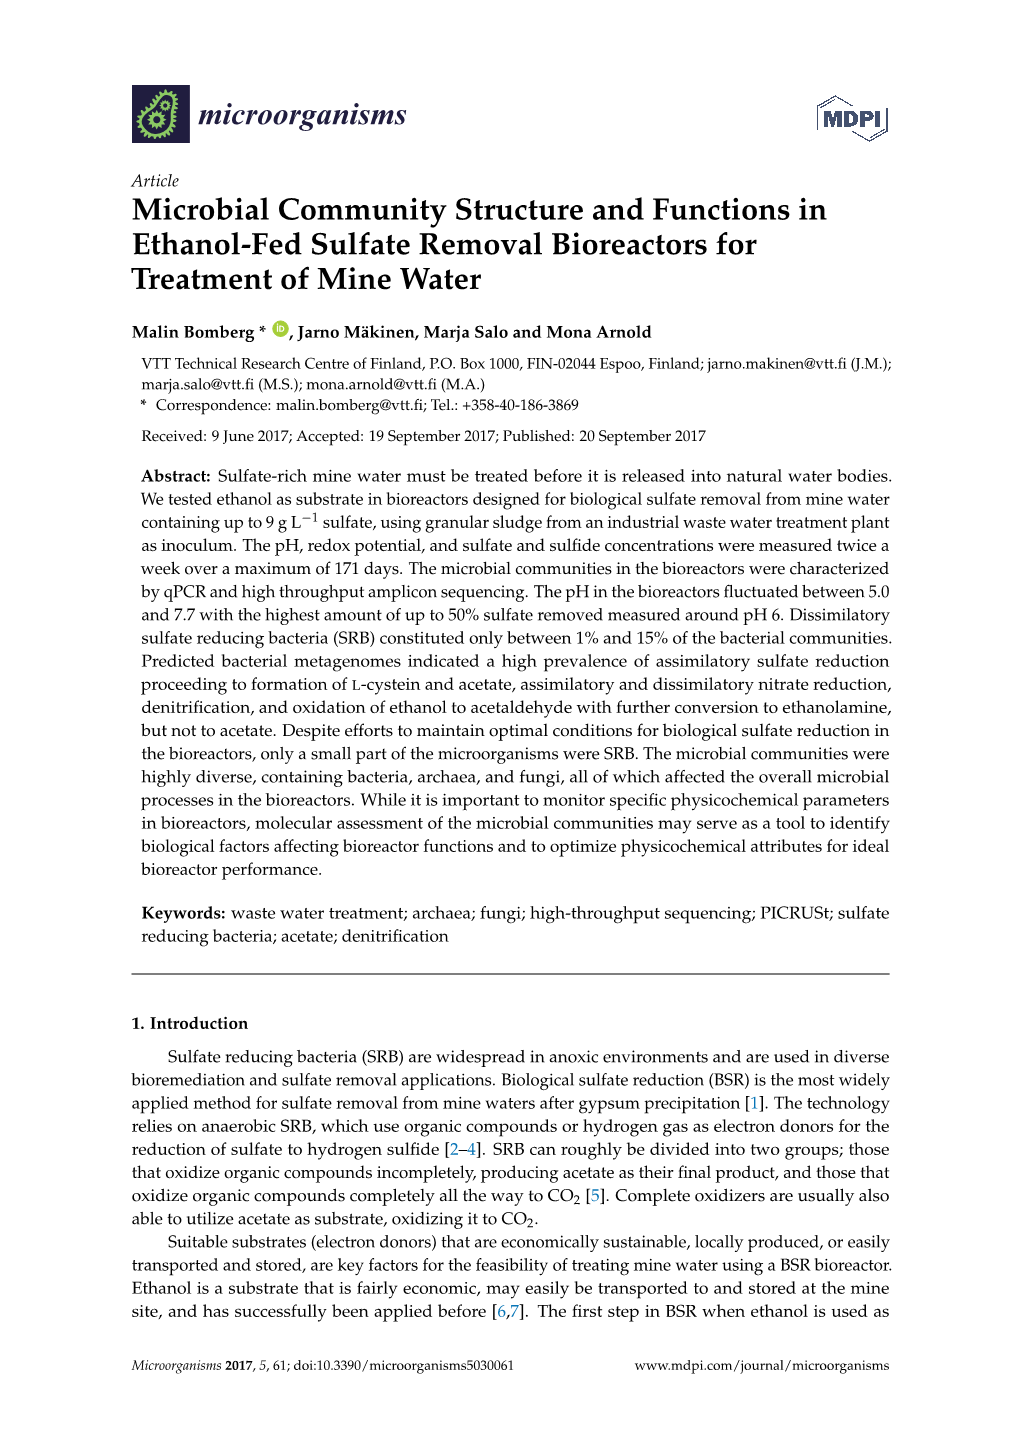 Microbial Community Structure and Functions in Ethanol-Fed Sulfate Removal Bioreactors for Treatment of Mine Water